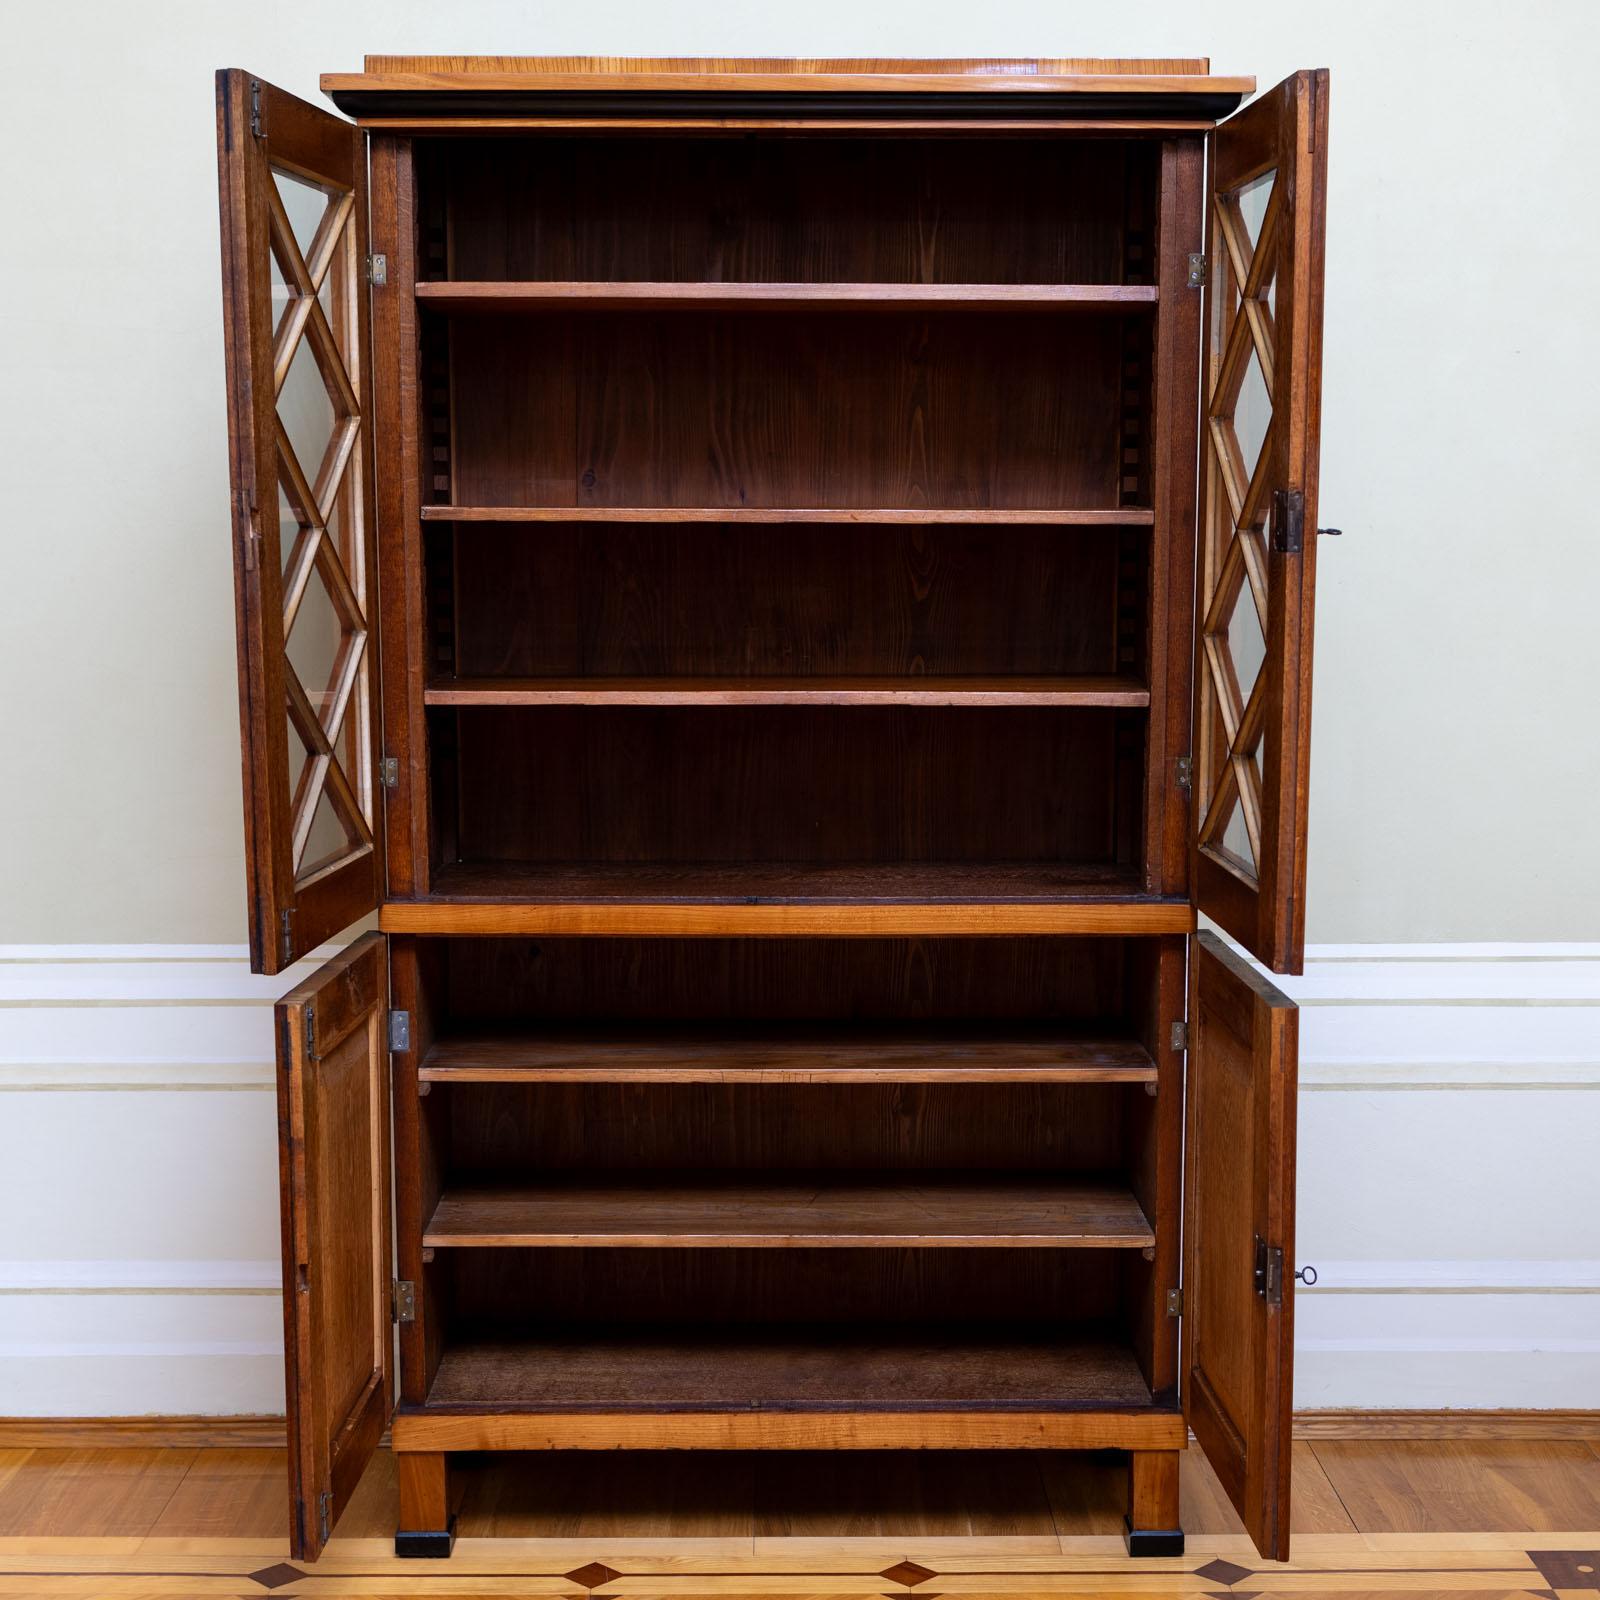 Biedermeier Bookcase with a two-door base and a two-door top with glazed doors with rhomboid strutting. The cabinet ist veneered in cherry and stands on square feet with ebonised details. The cabinet has been restored and polished by hand. 